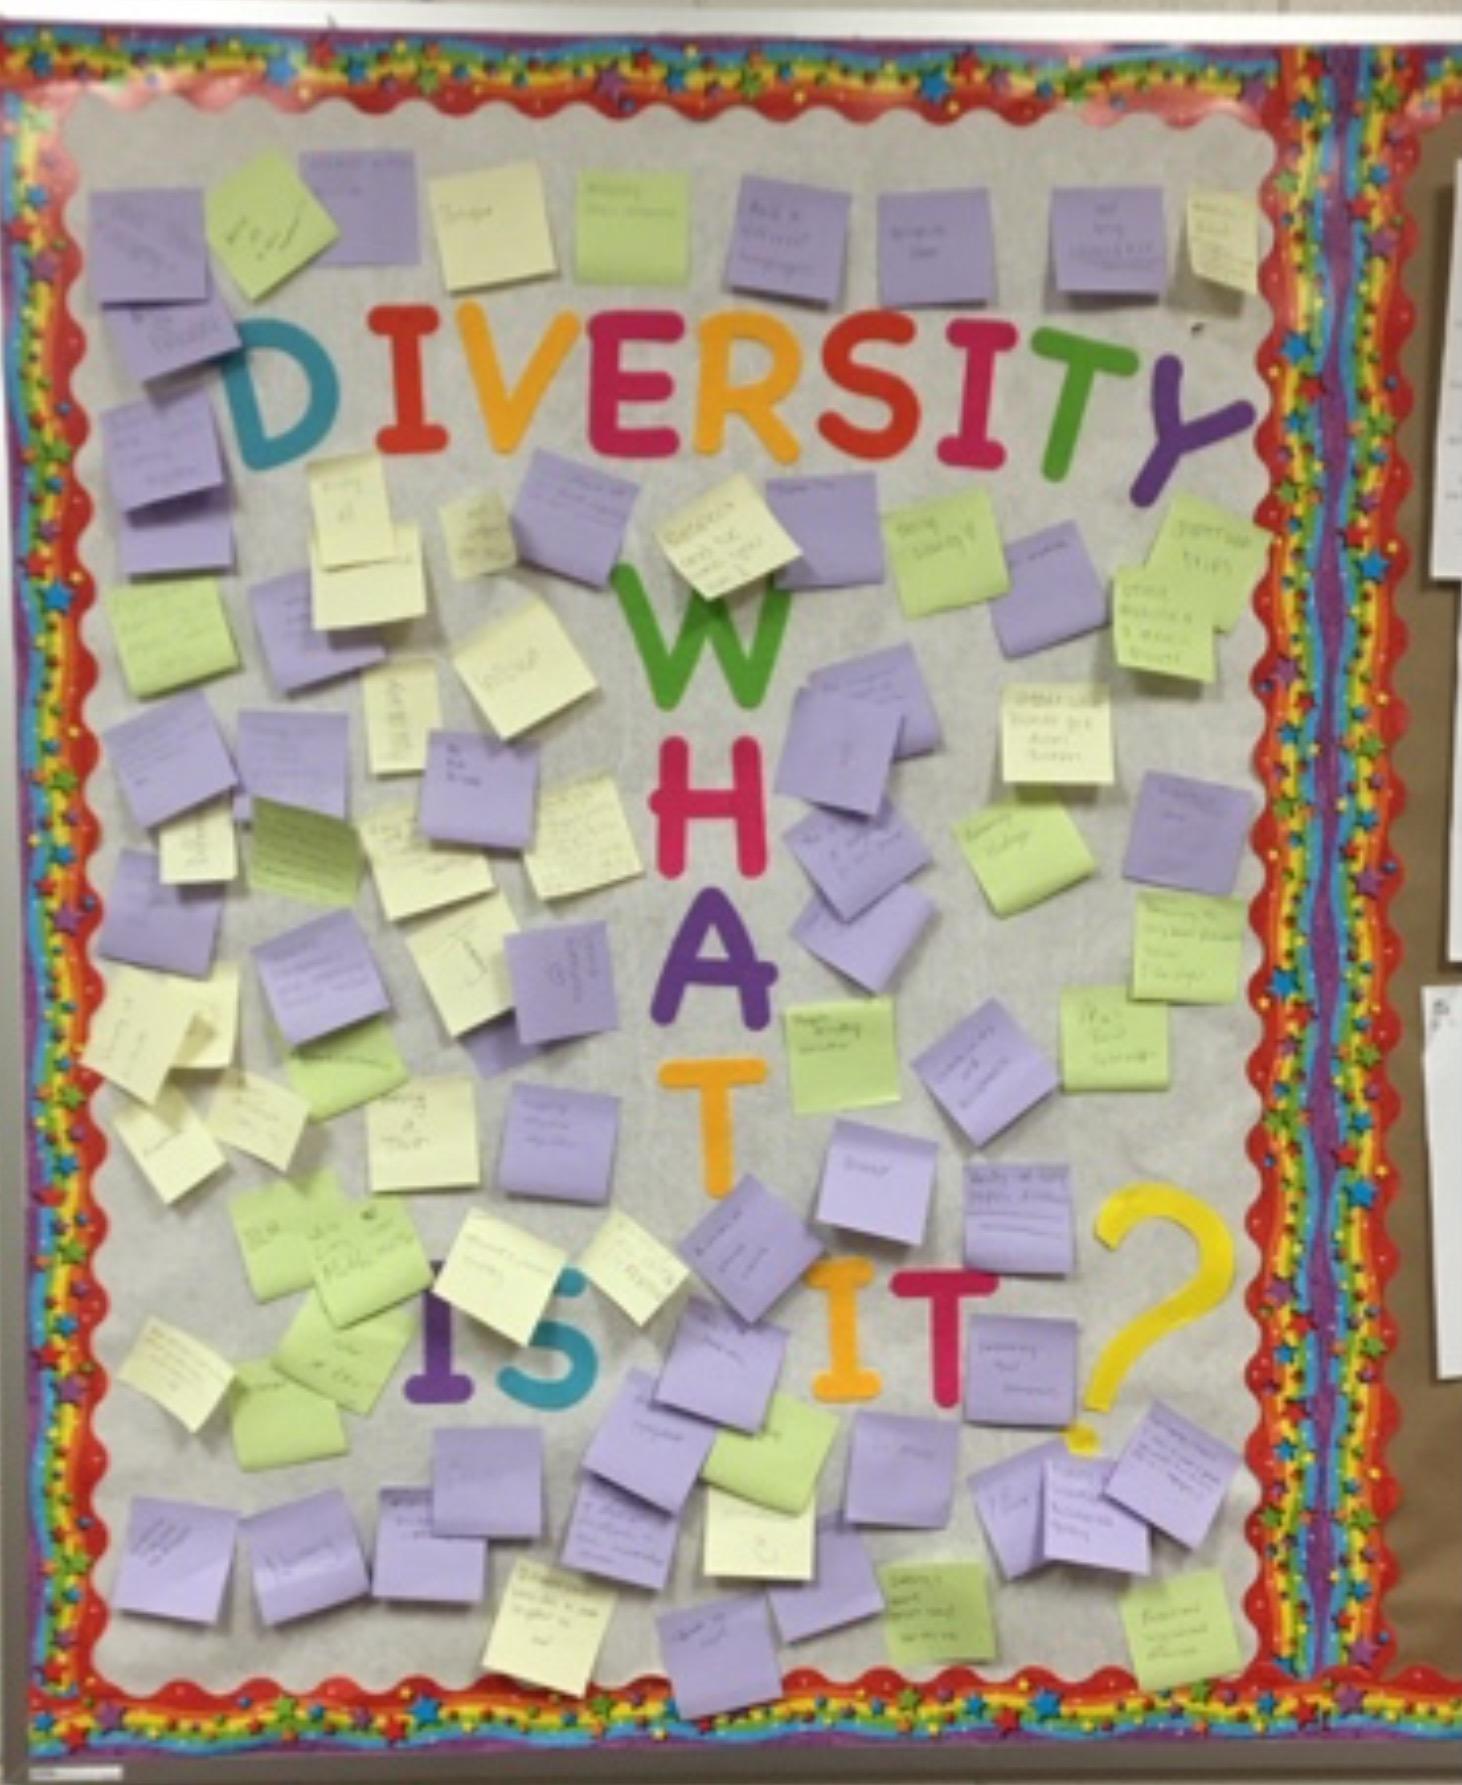 This bulletin board outside Mrs. Crenshaw's allows students to share their thoughts on what diversity means at WJ.